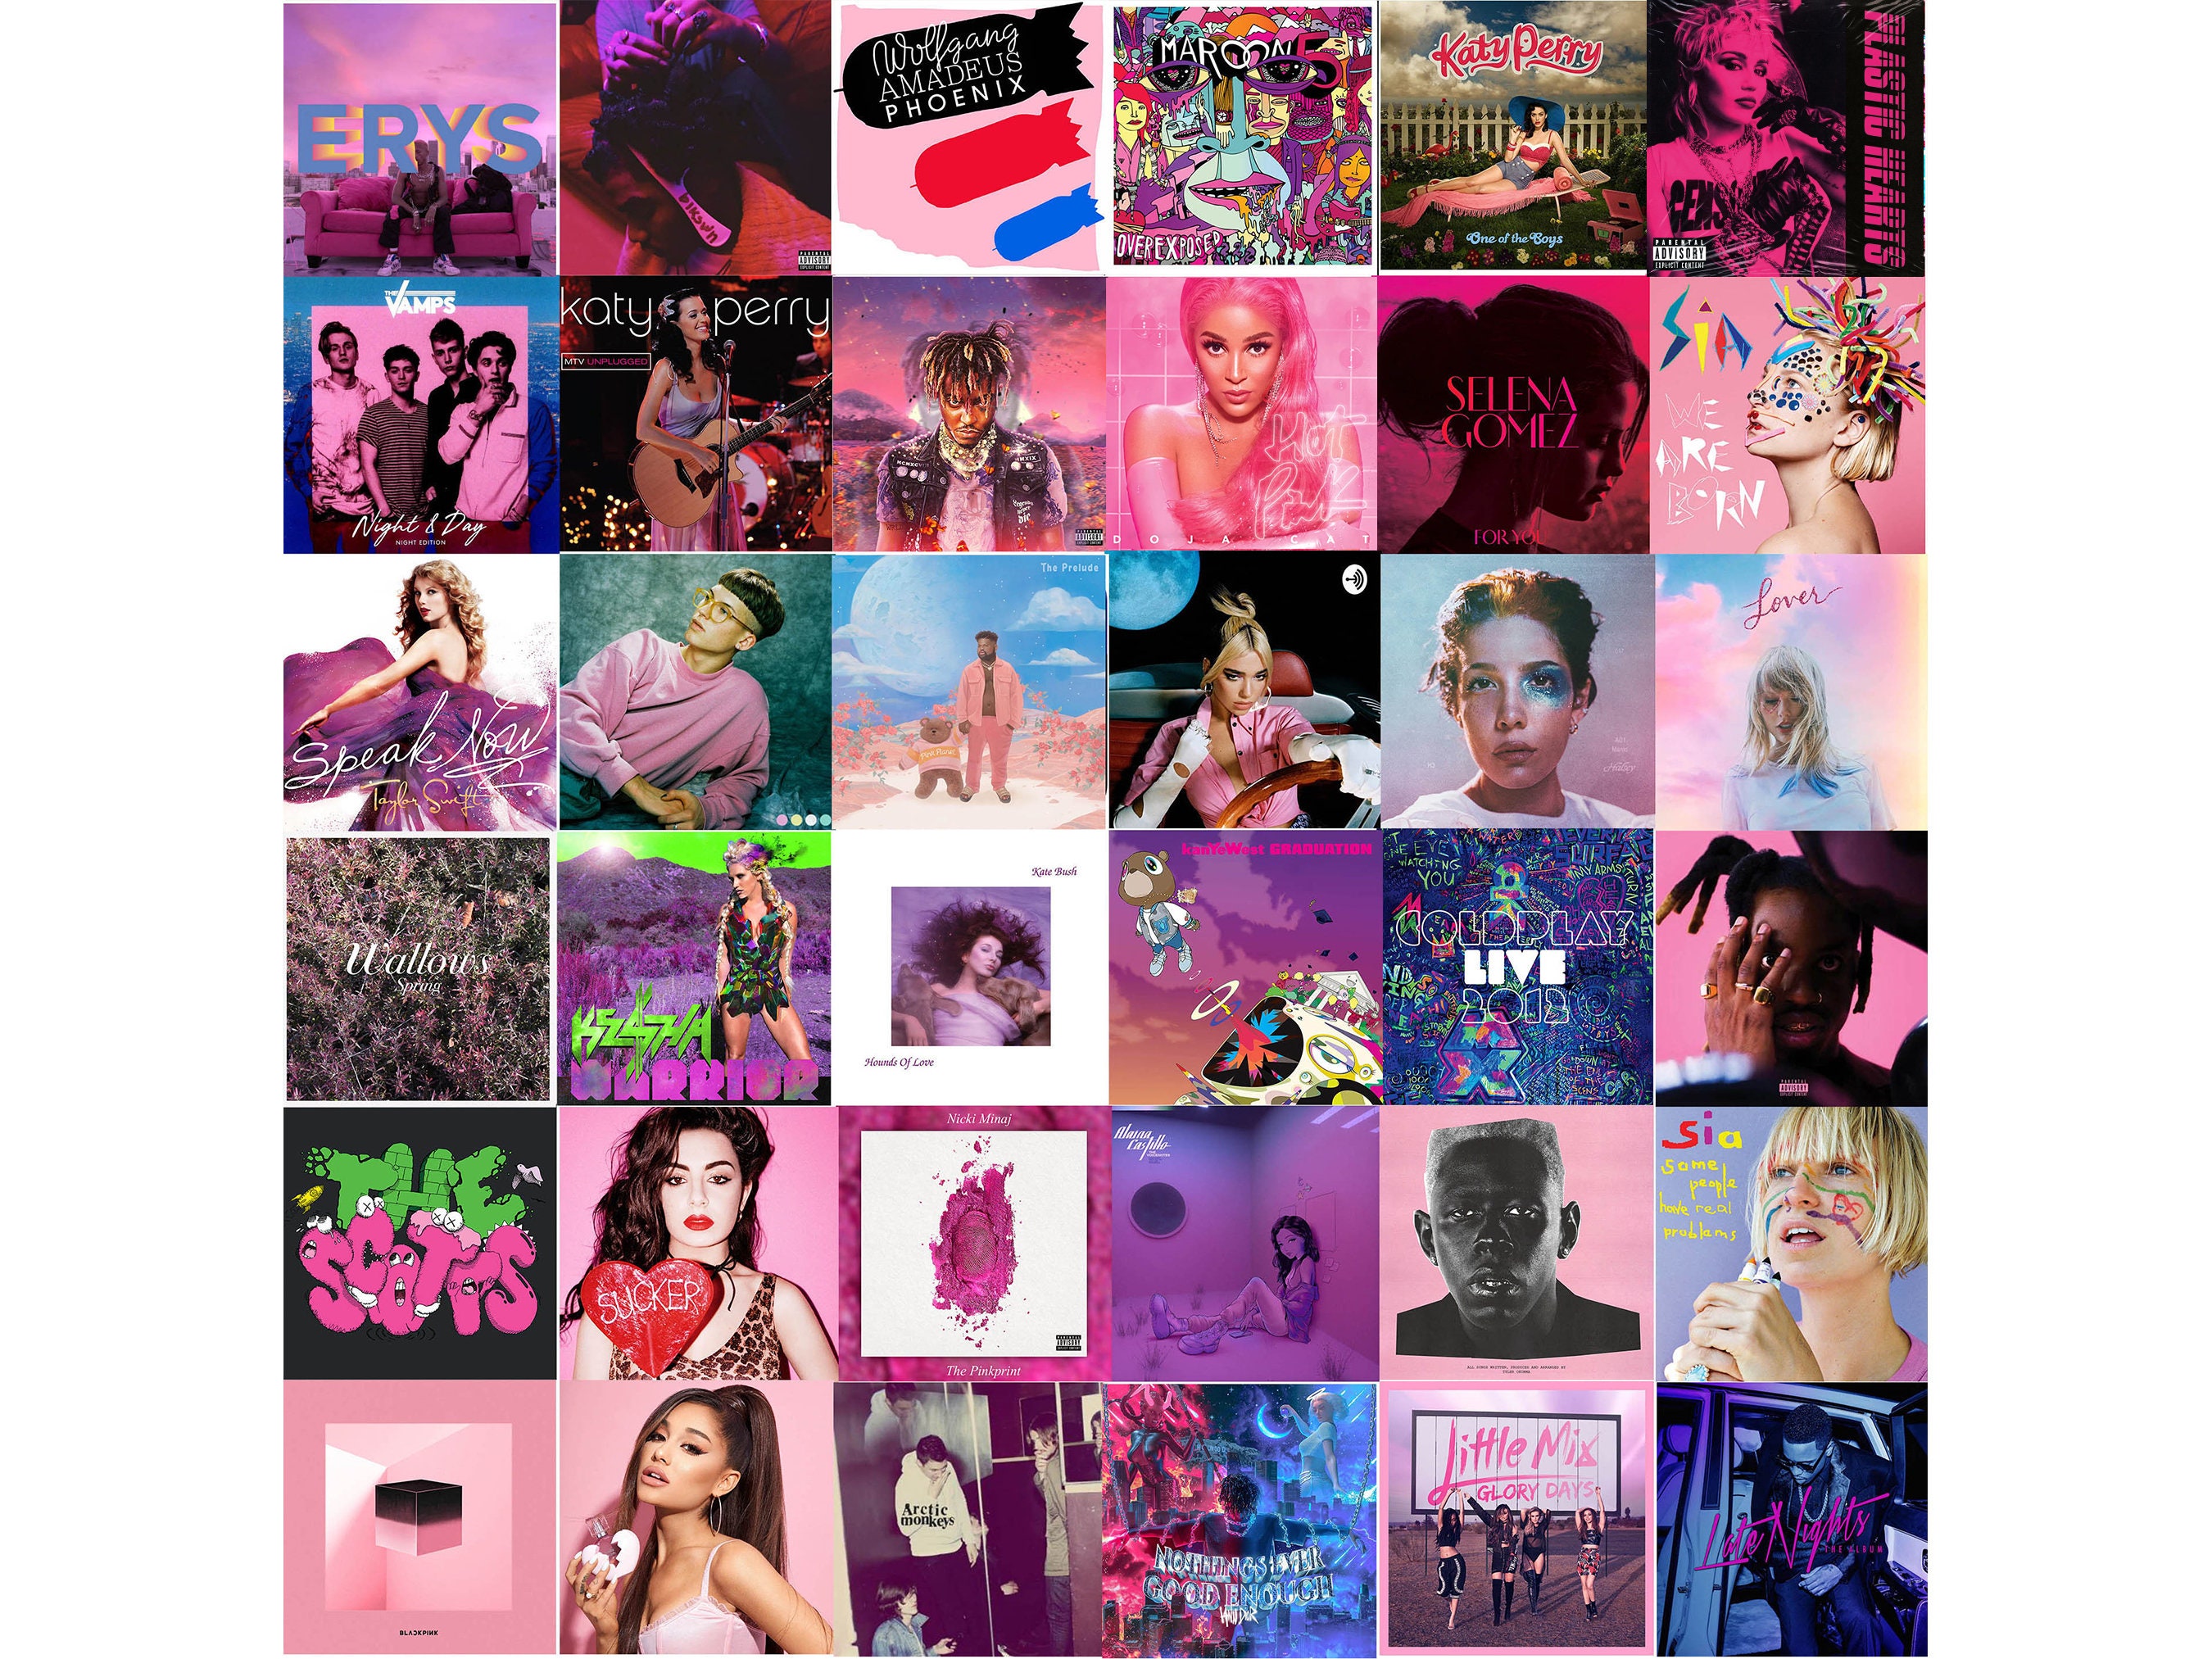 Thought I would share this here. Top 9 albums with pink covers. While  you're here you should check me out on Instagram @neutrl.cringe.hotel I  make stuff like this and post daily. 